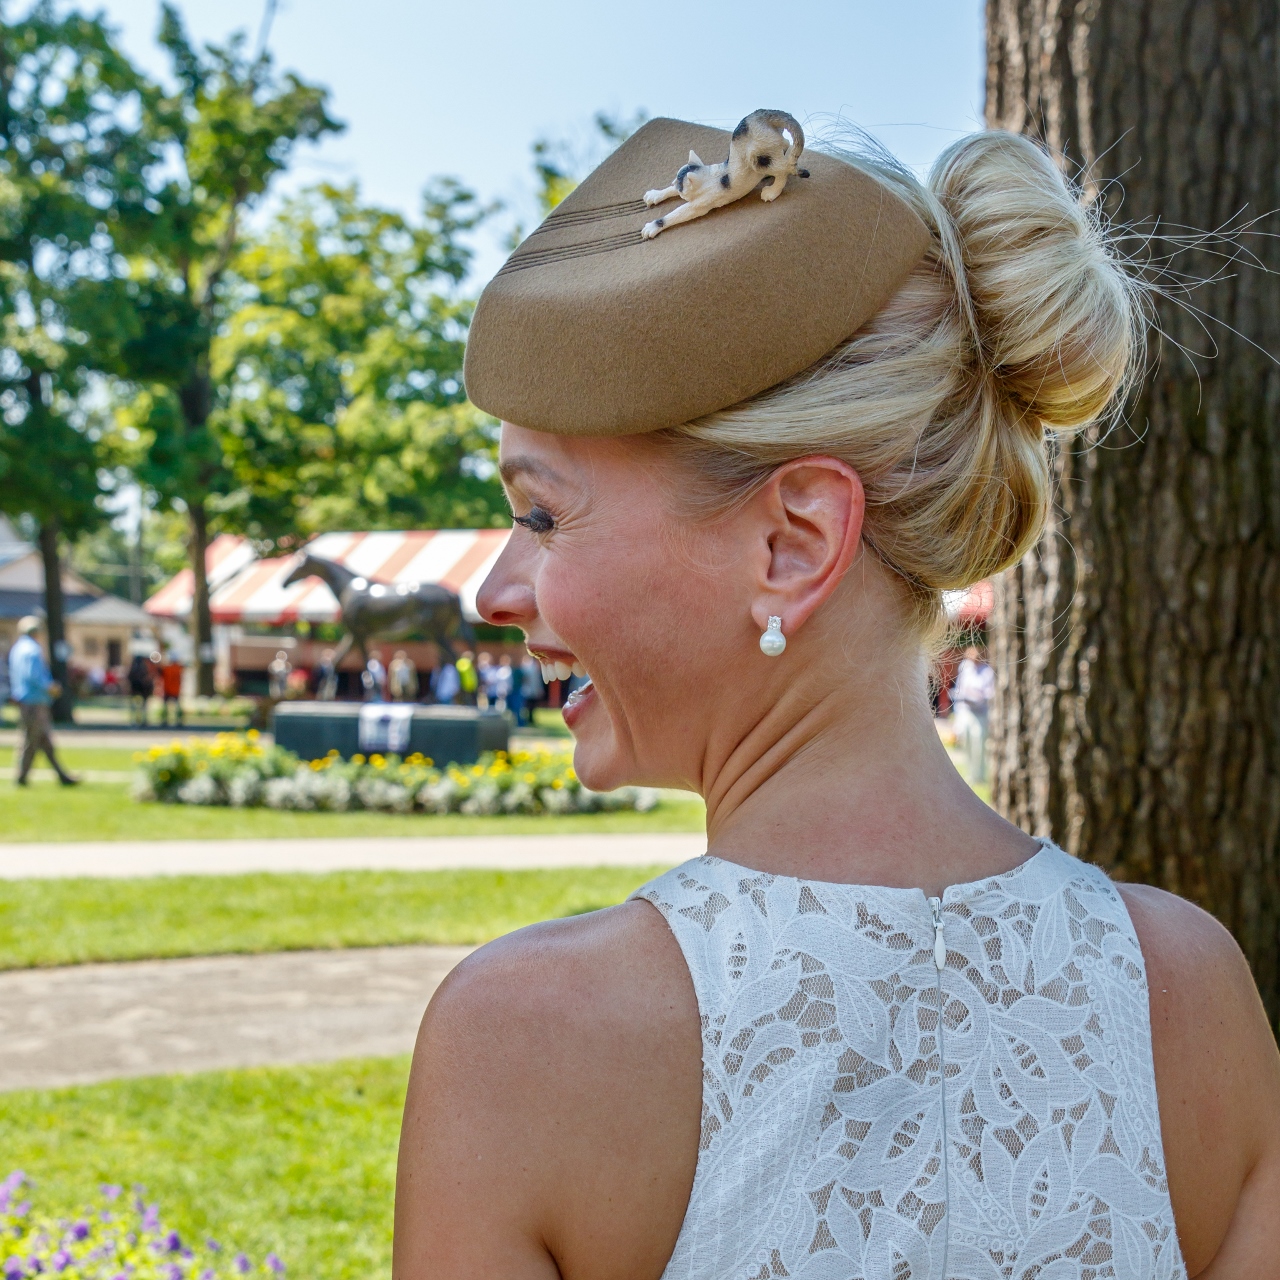 Fashion at the Races Travers by Jesse Caris at Saratoga (45)